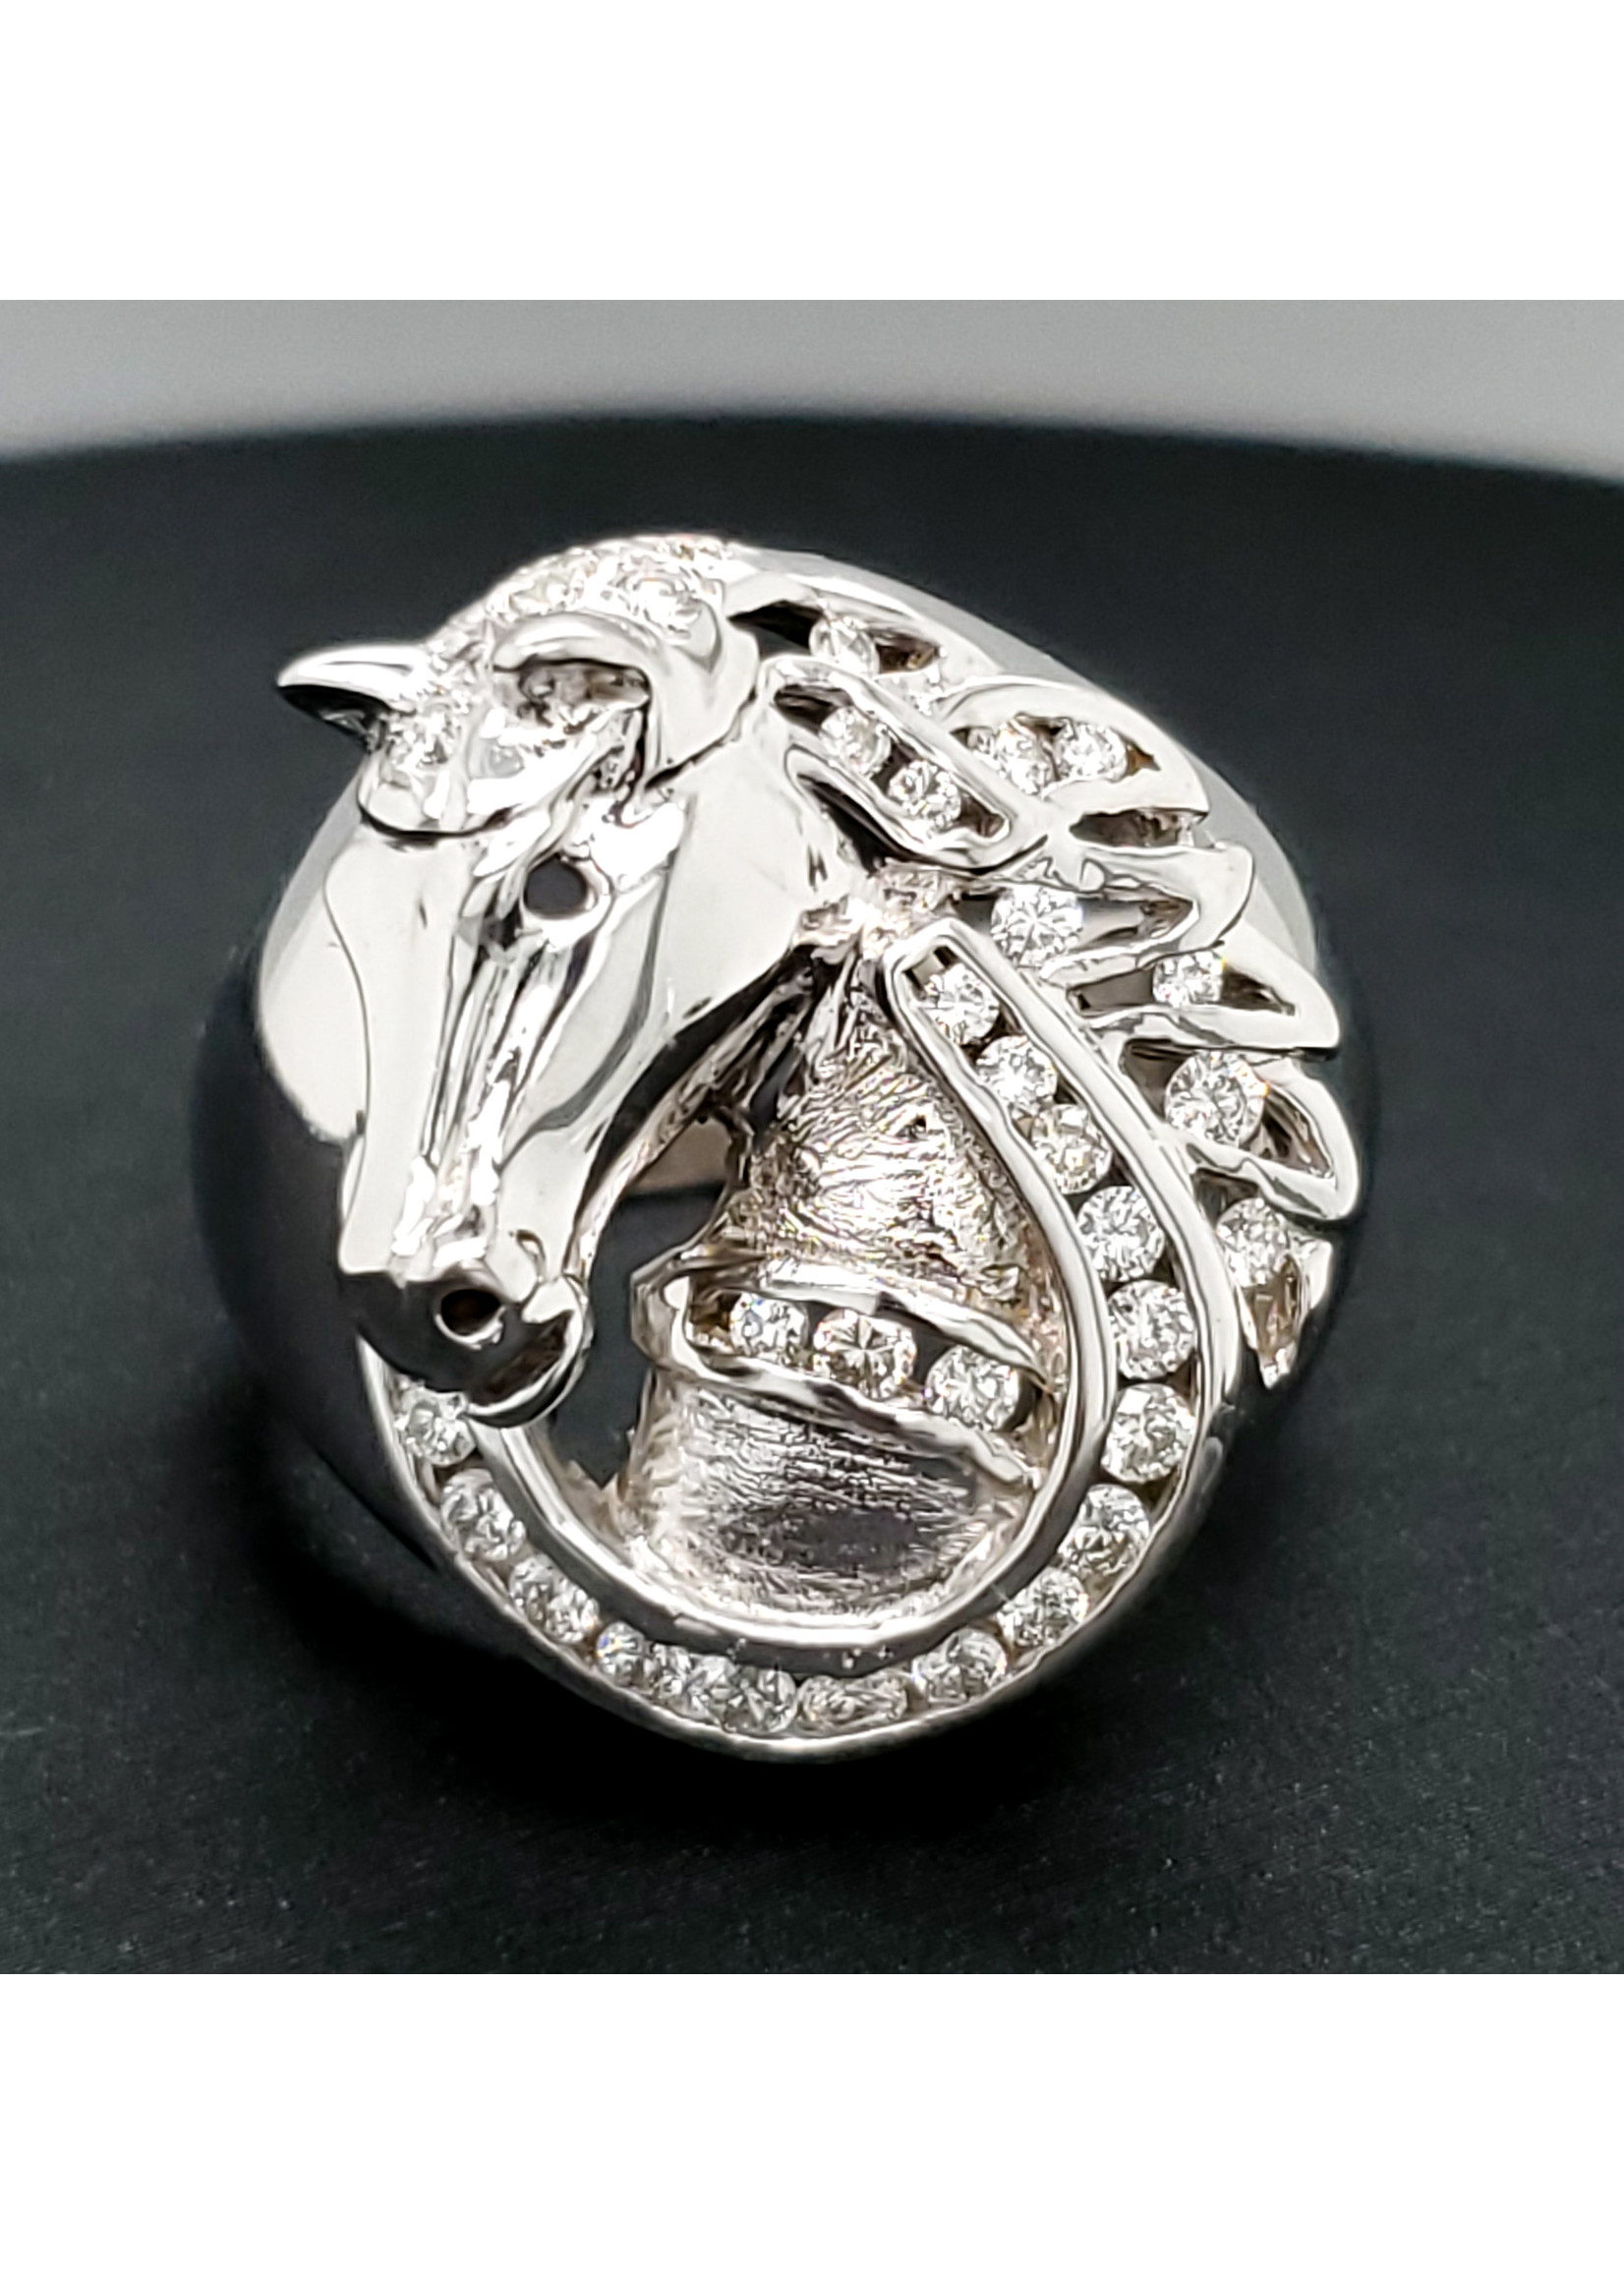 KDesign Studio 18kt White Gold Horse Ring by Goldsmith Hang Lau